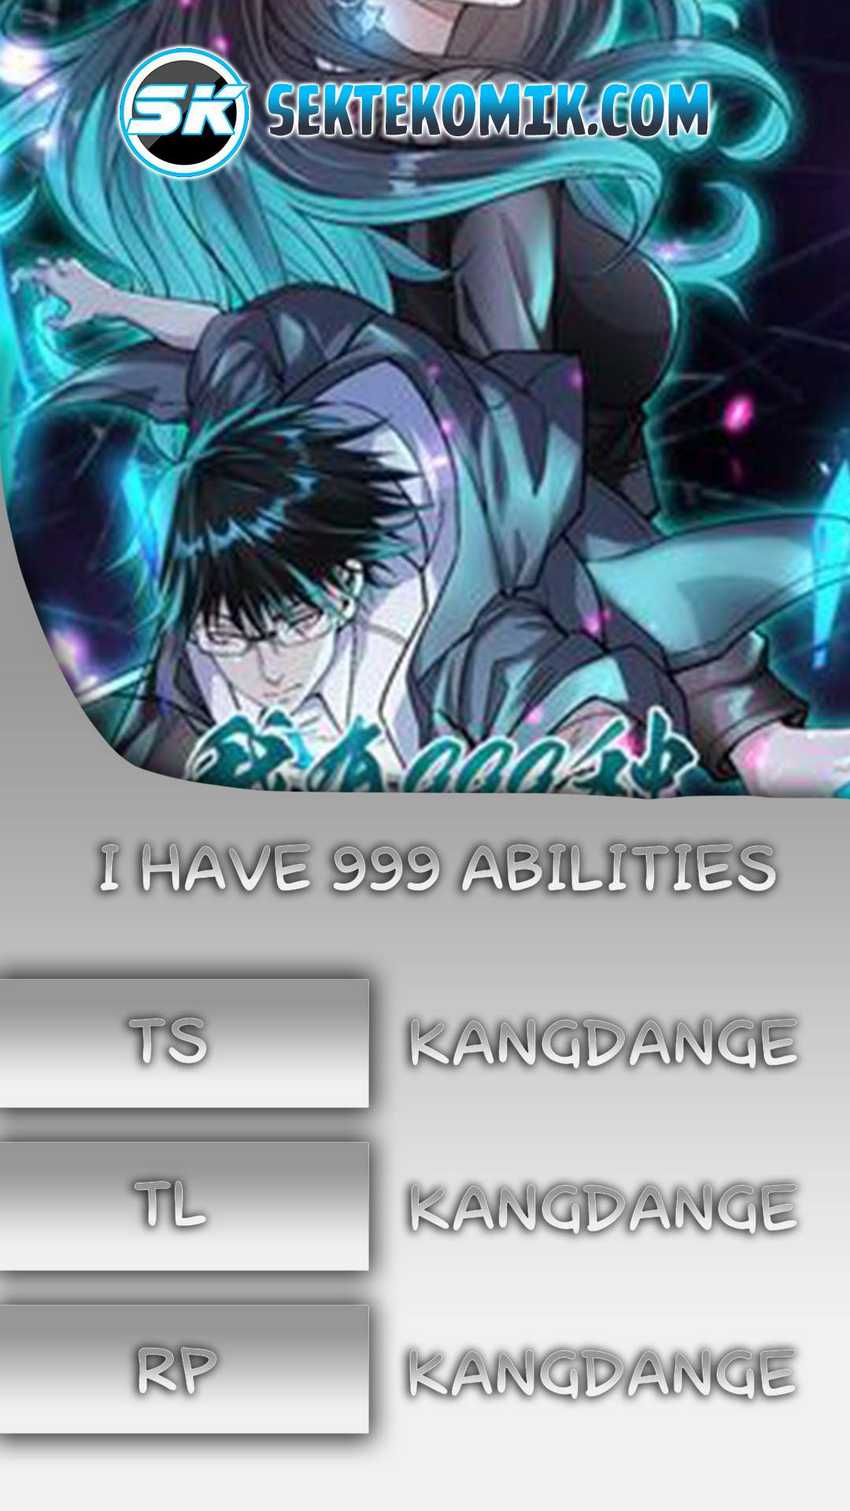 I Can Snatch 999 Types of Abilities Chapter 01